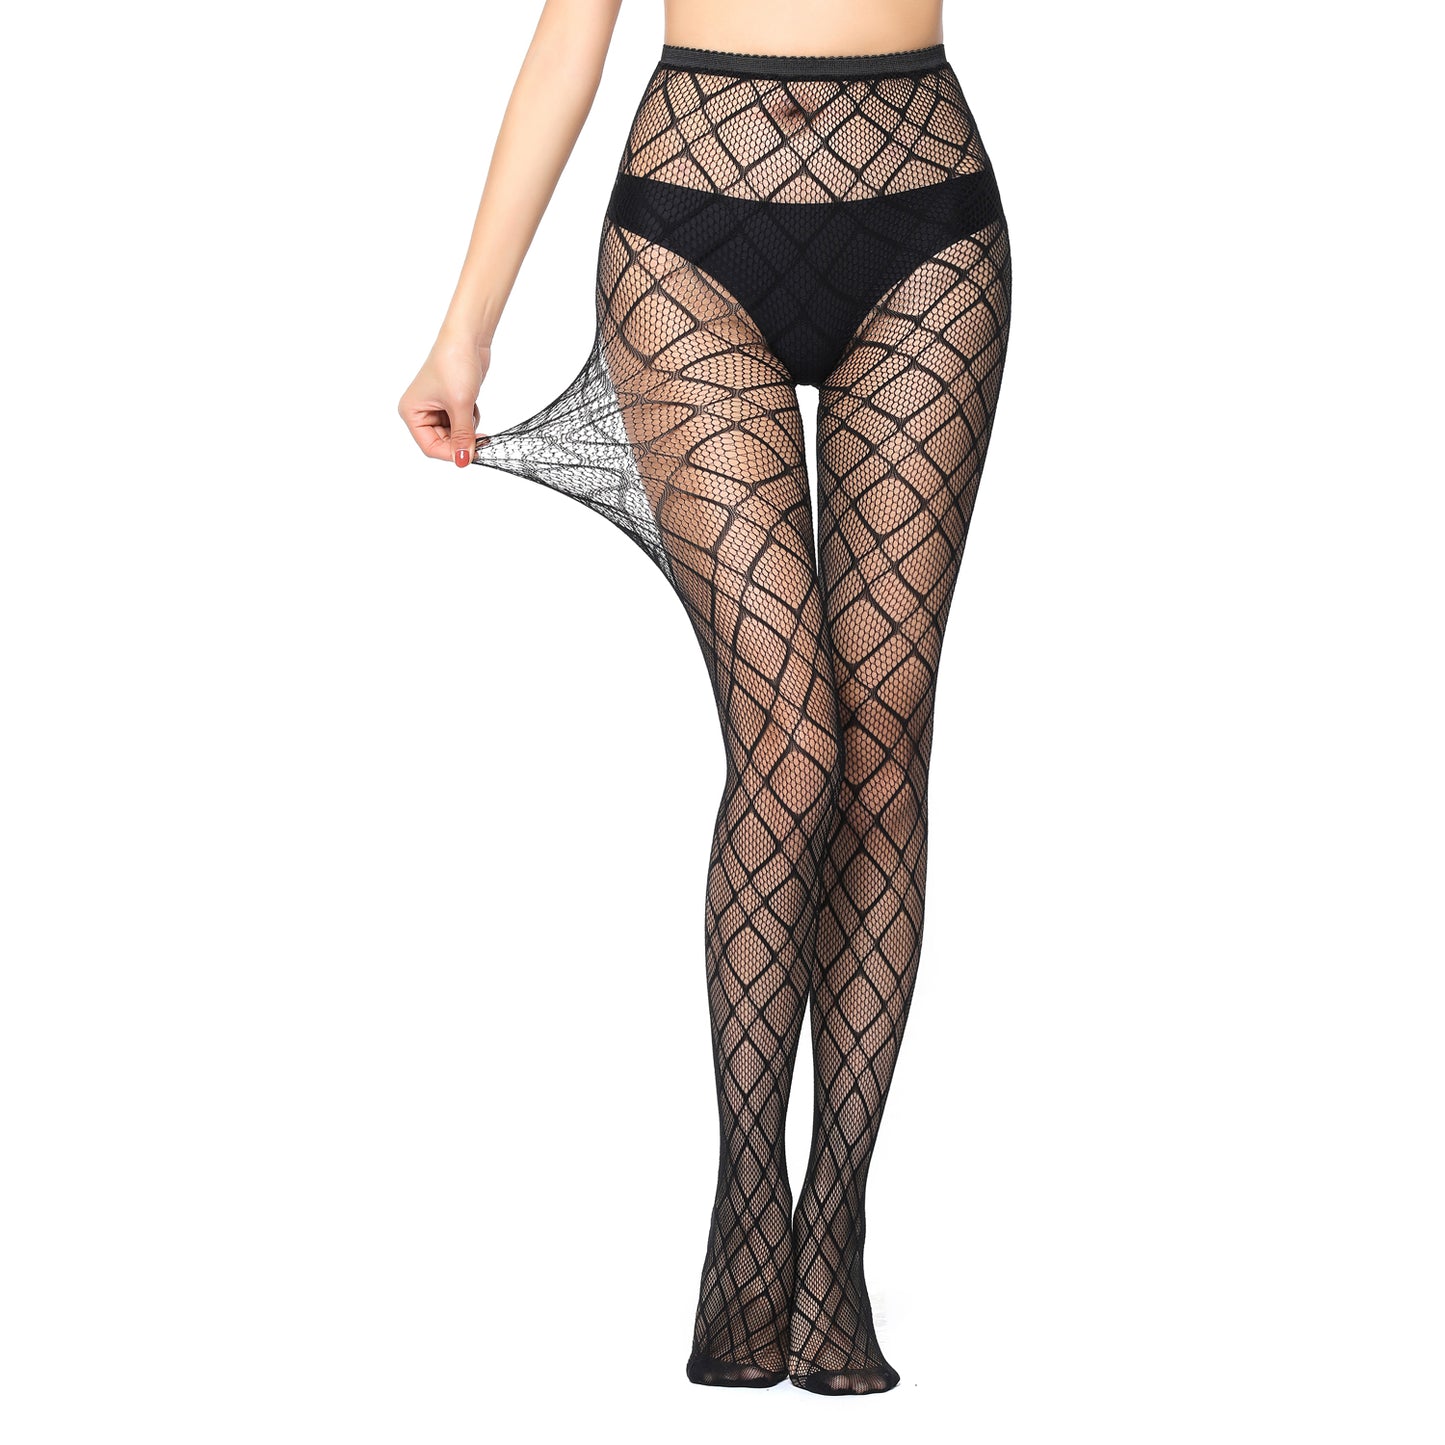 Patterned fishnet tights with remarkable stretch in size 6-16